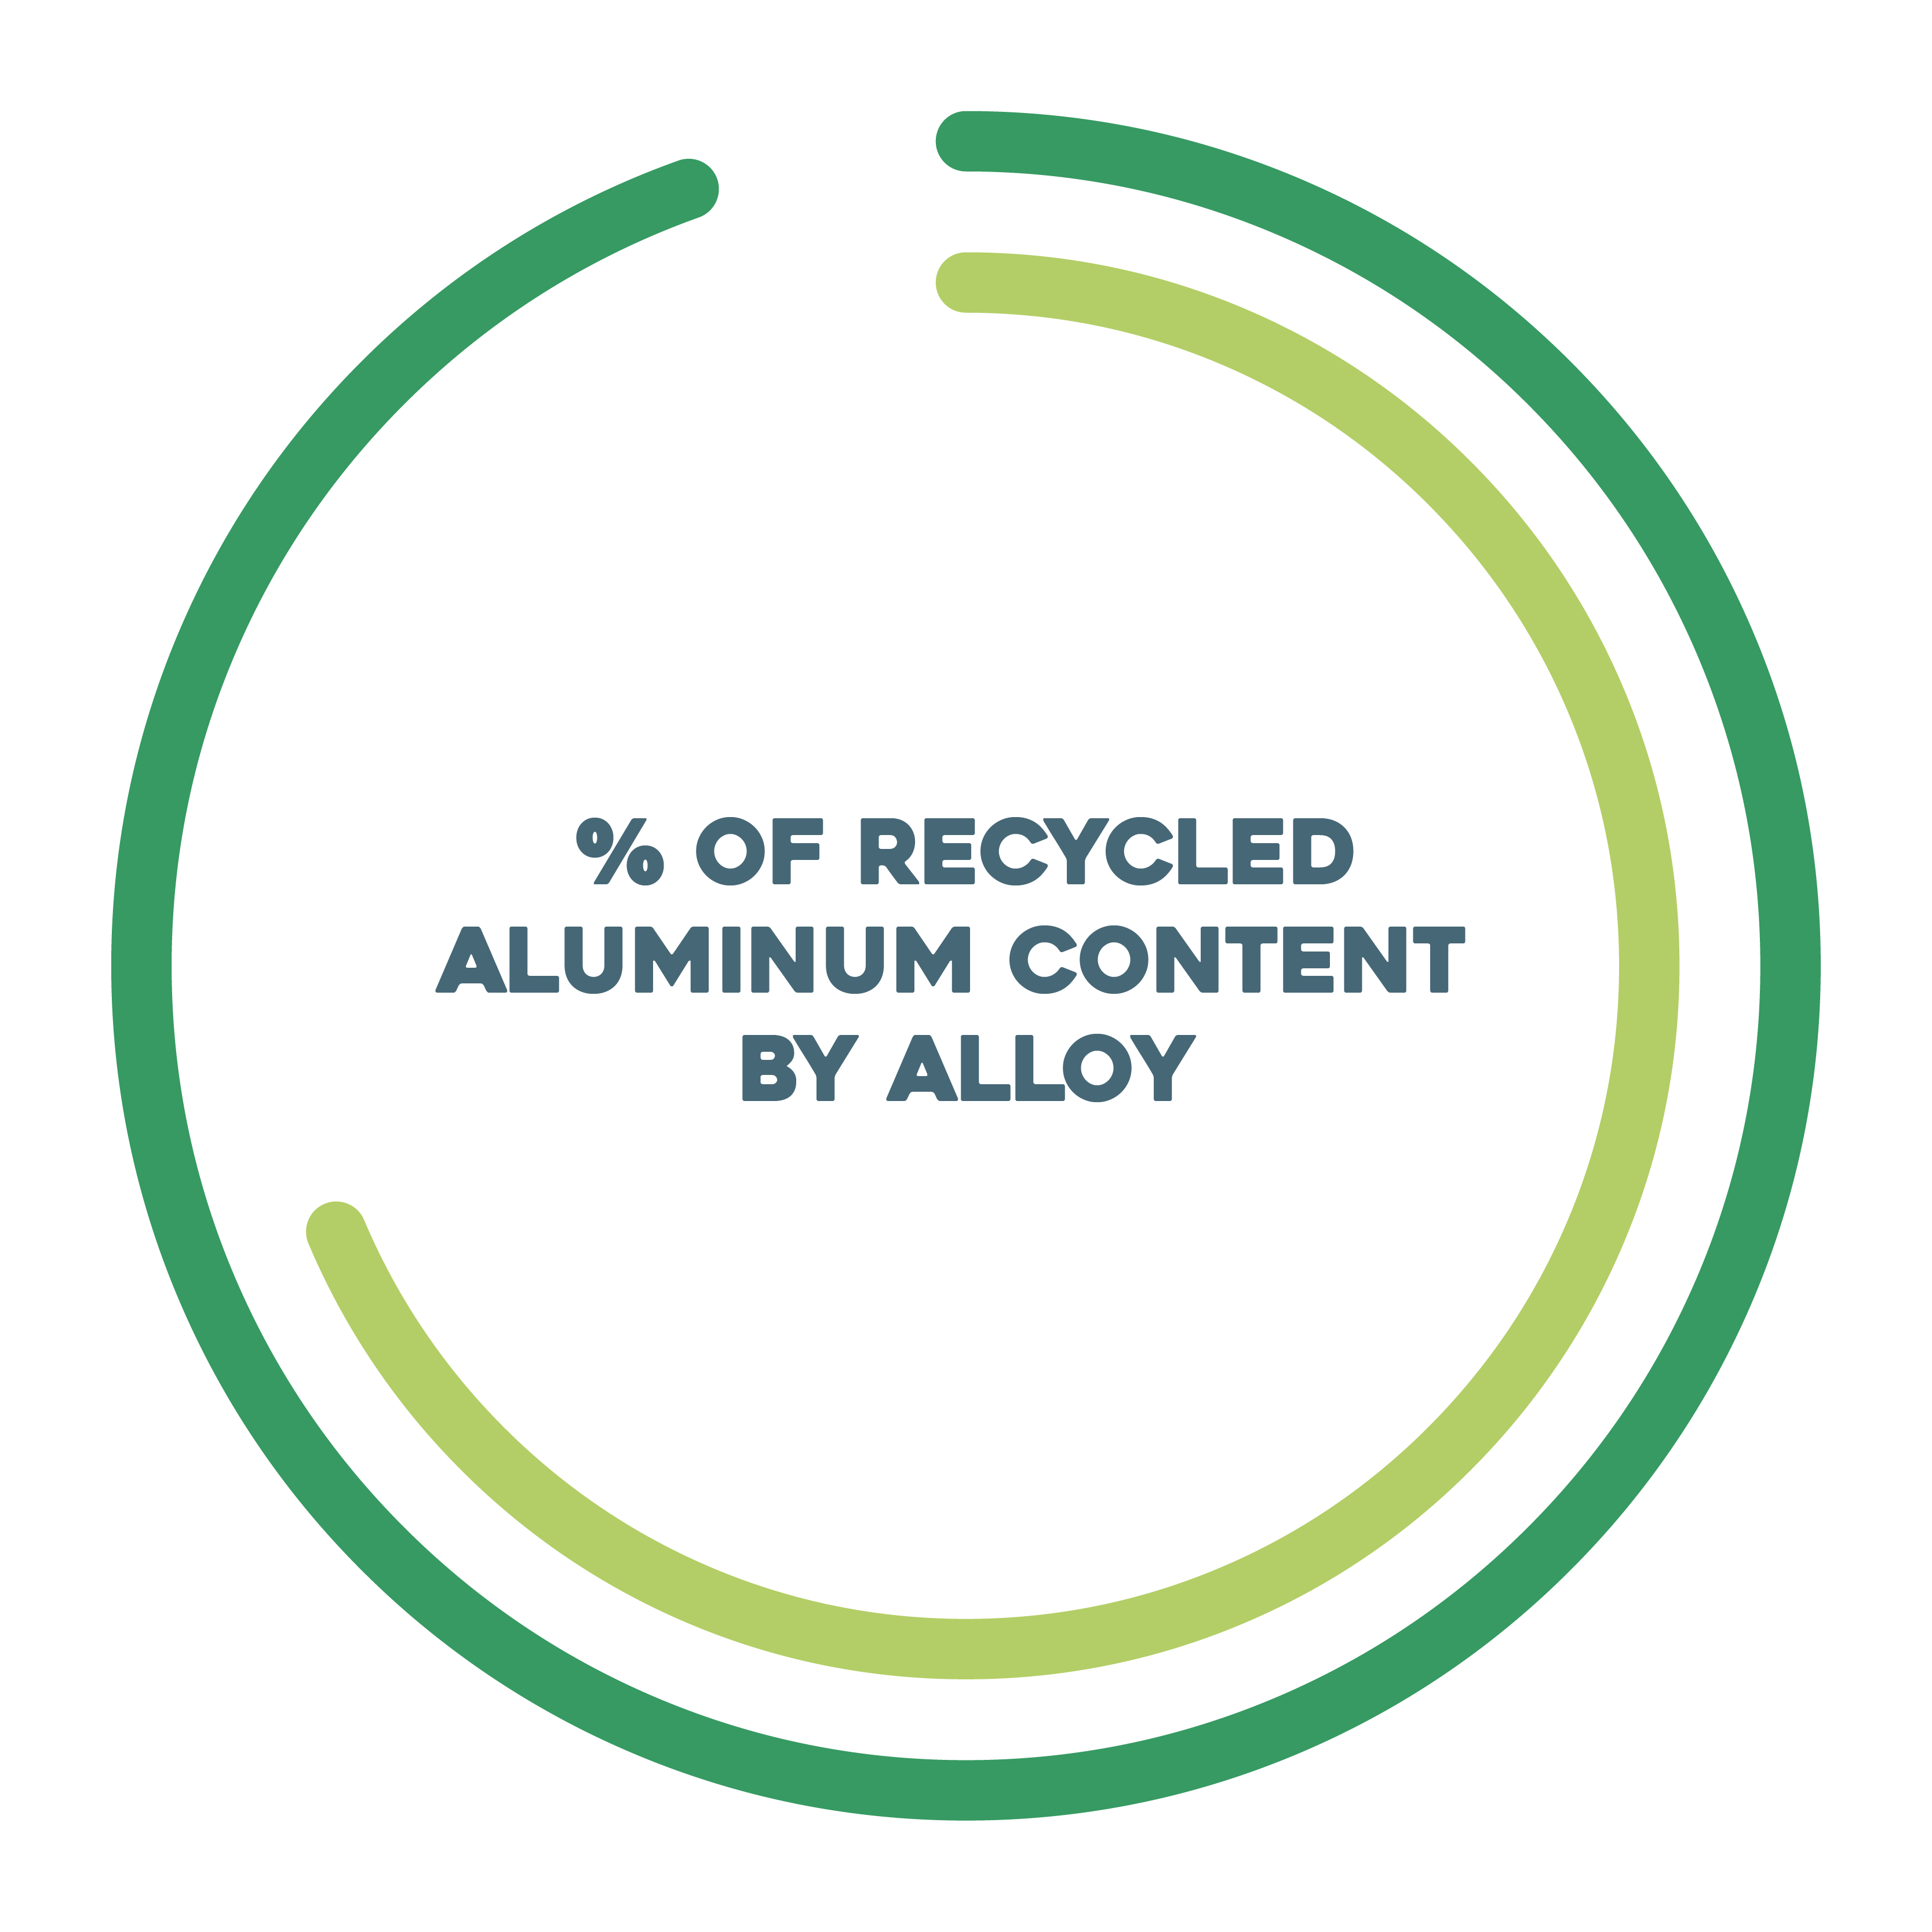 % of recycled aluminum content by alloy